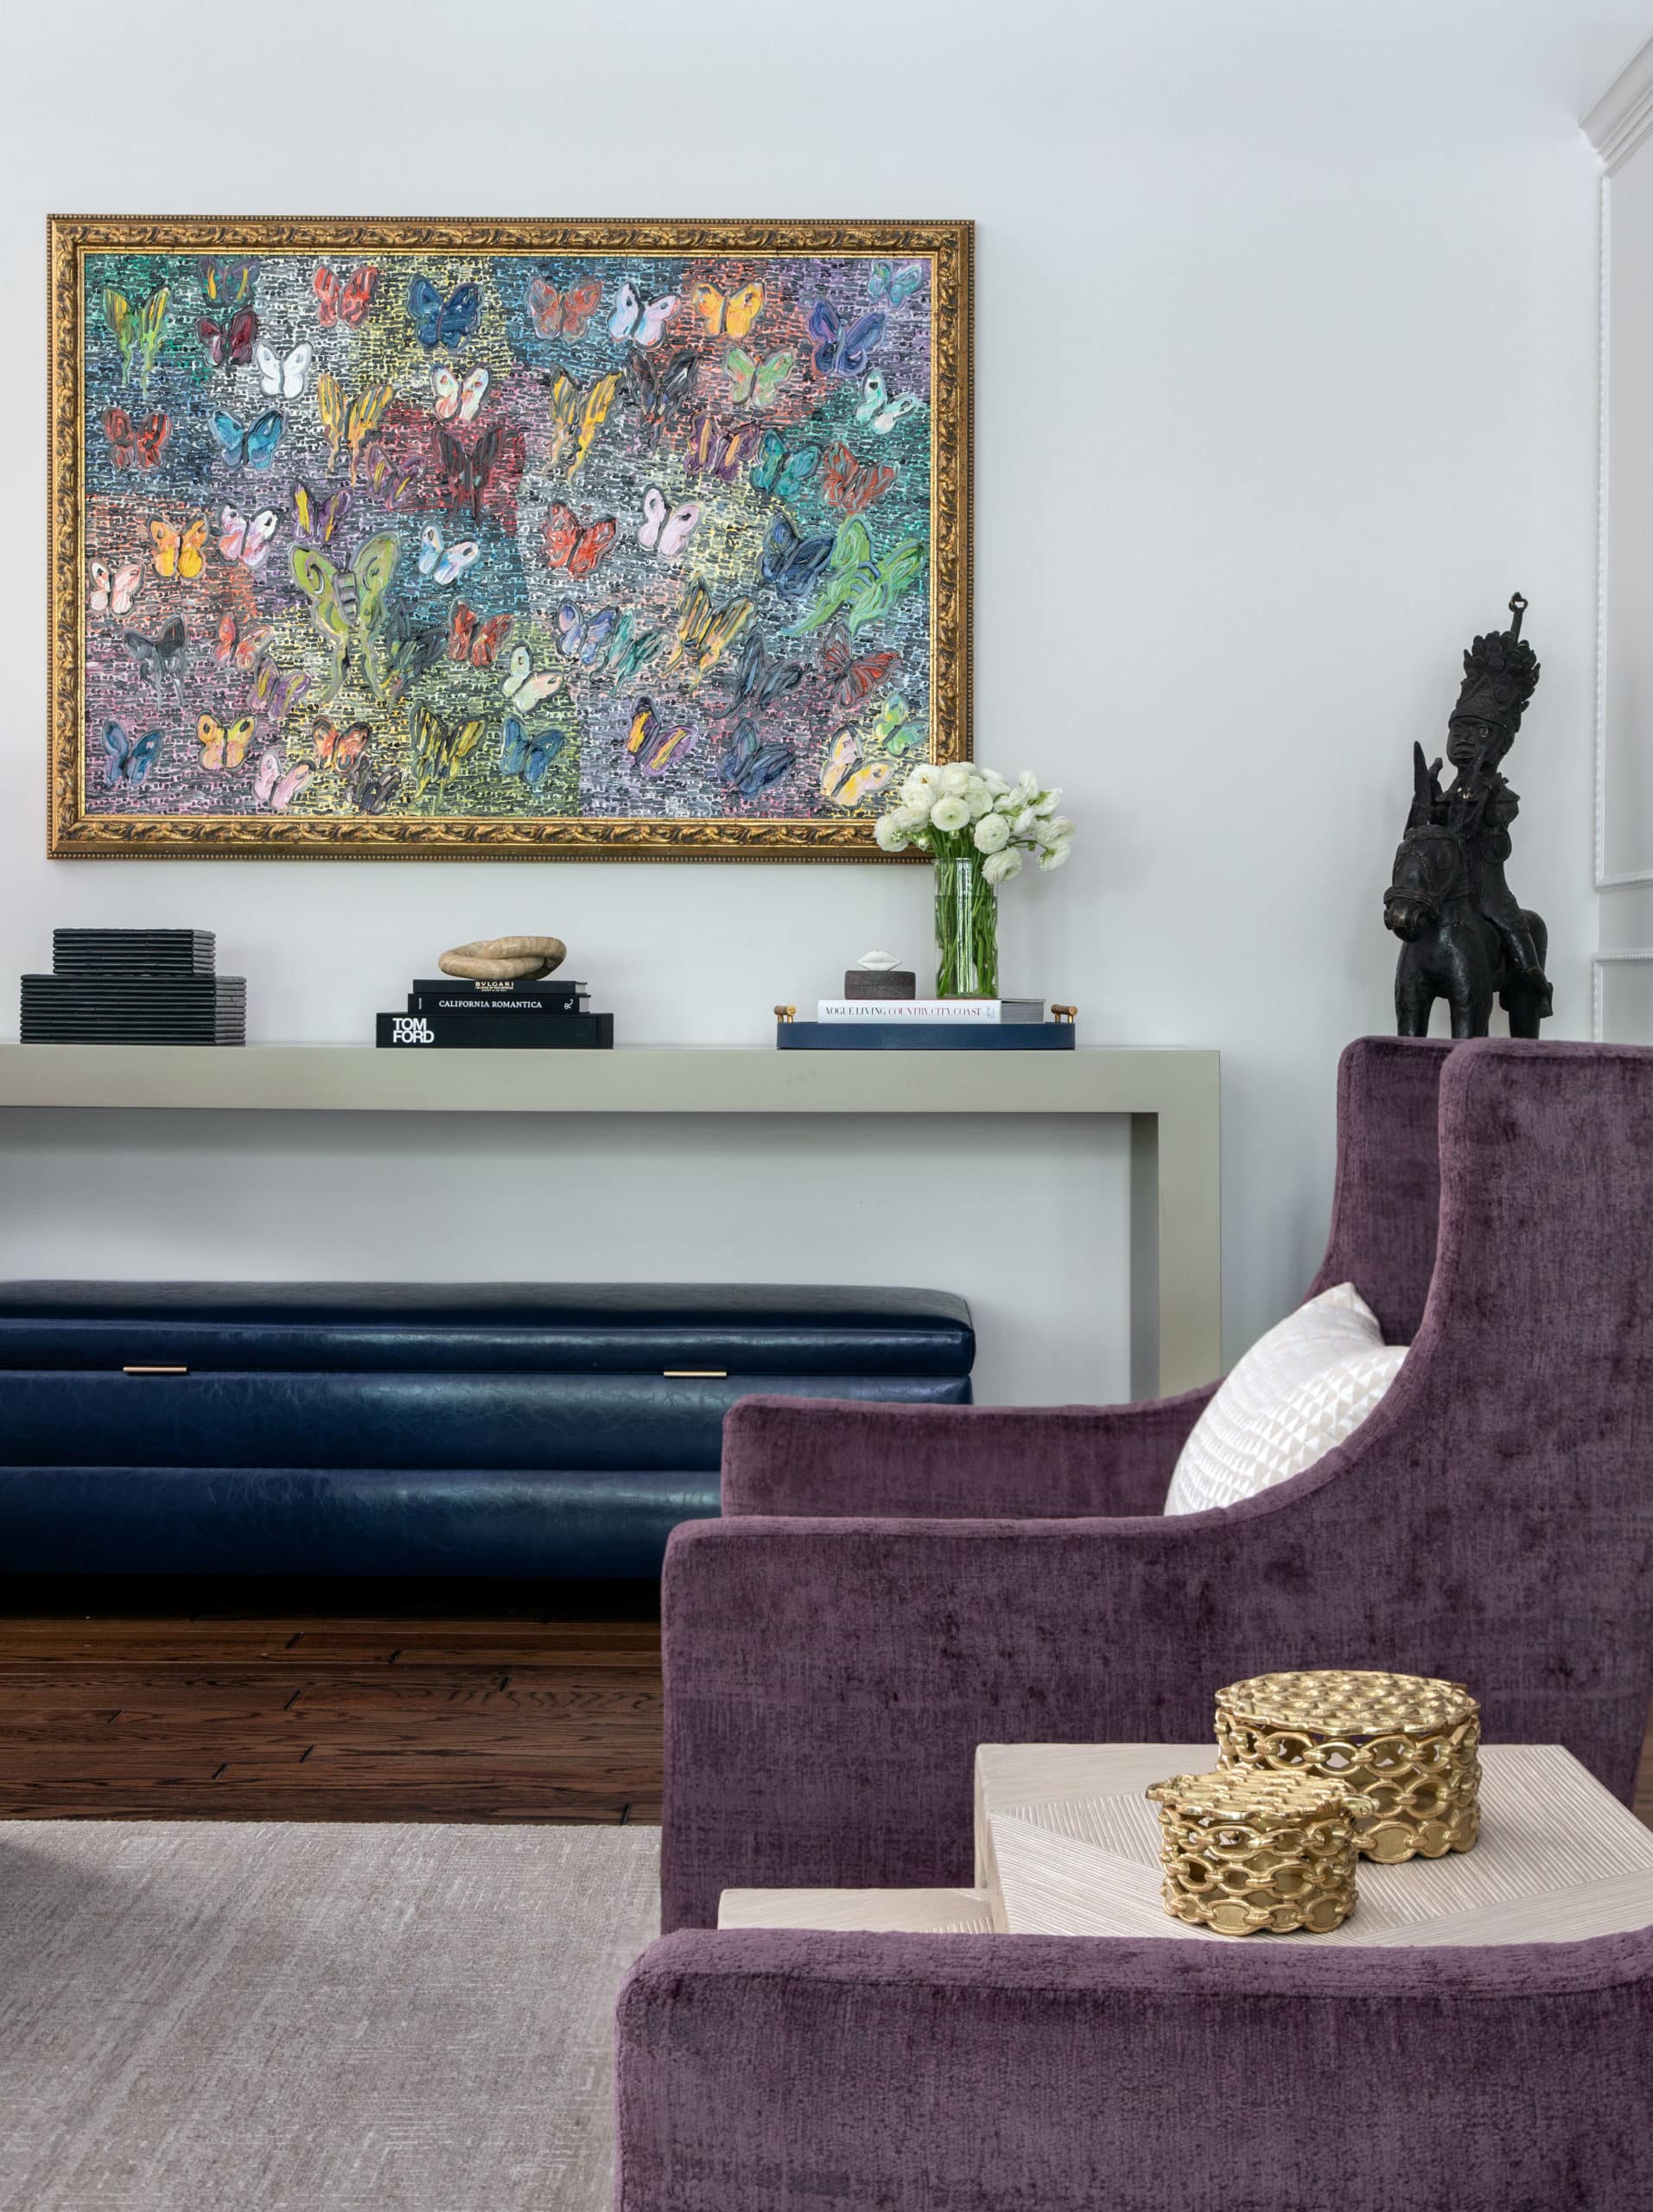 Colorful Hunt Slonem piece hanging in a living room with purple accent chair